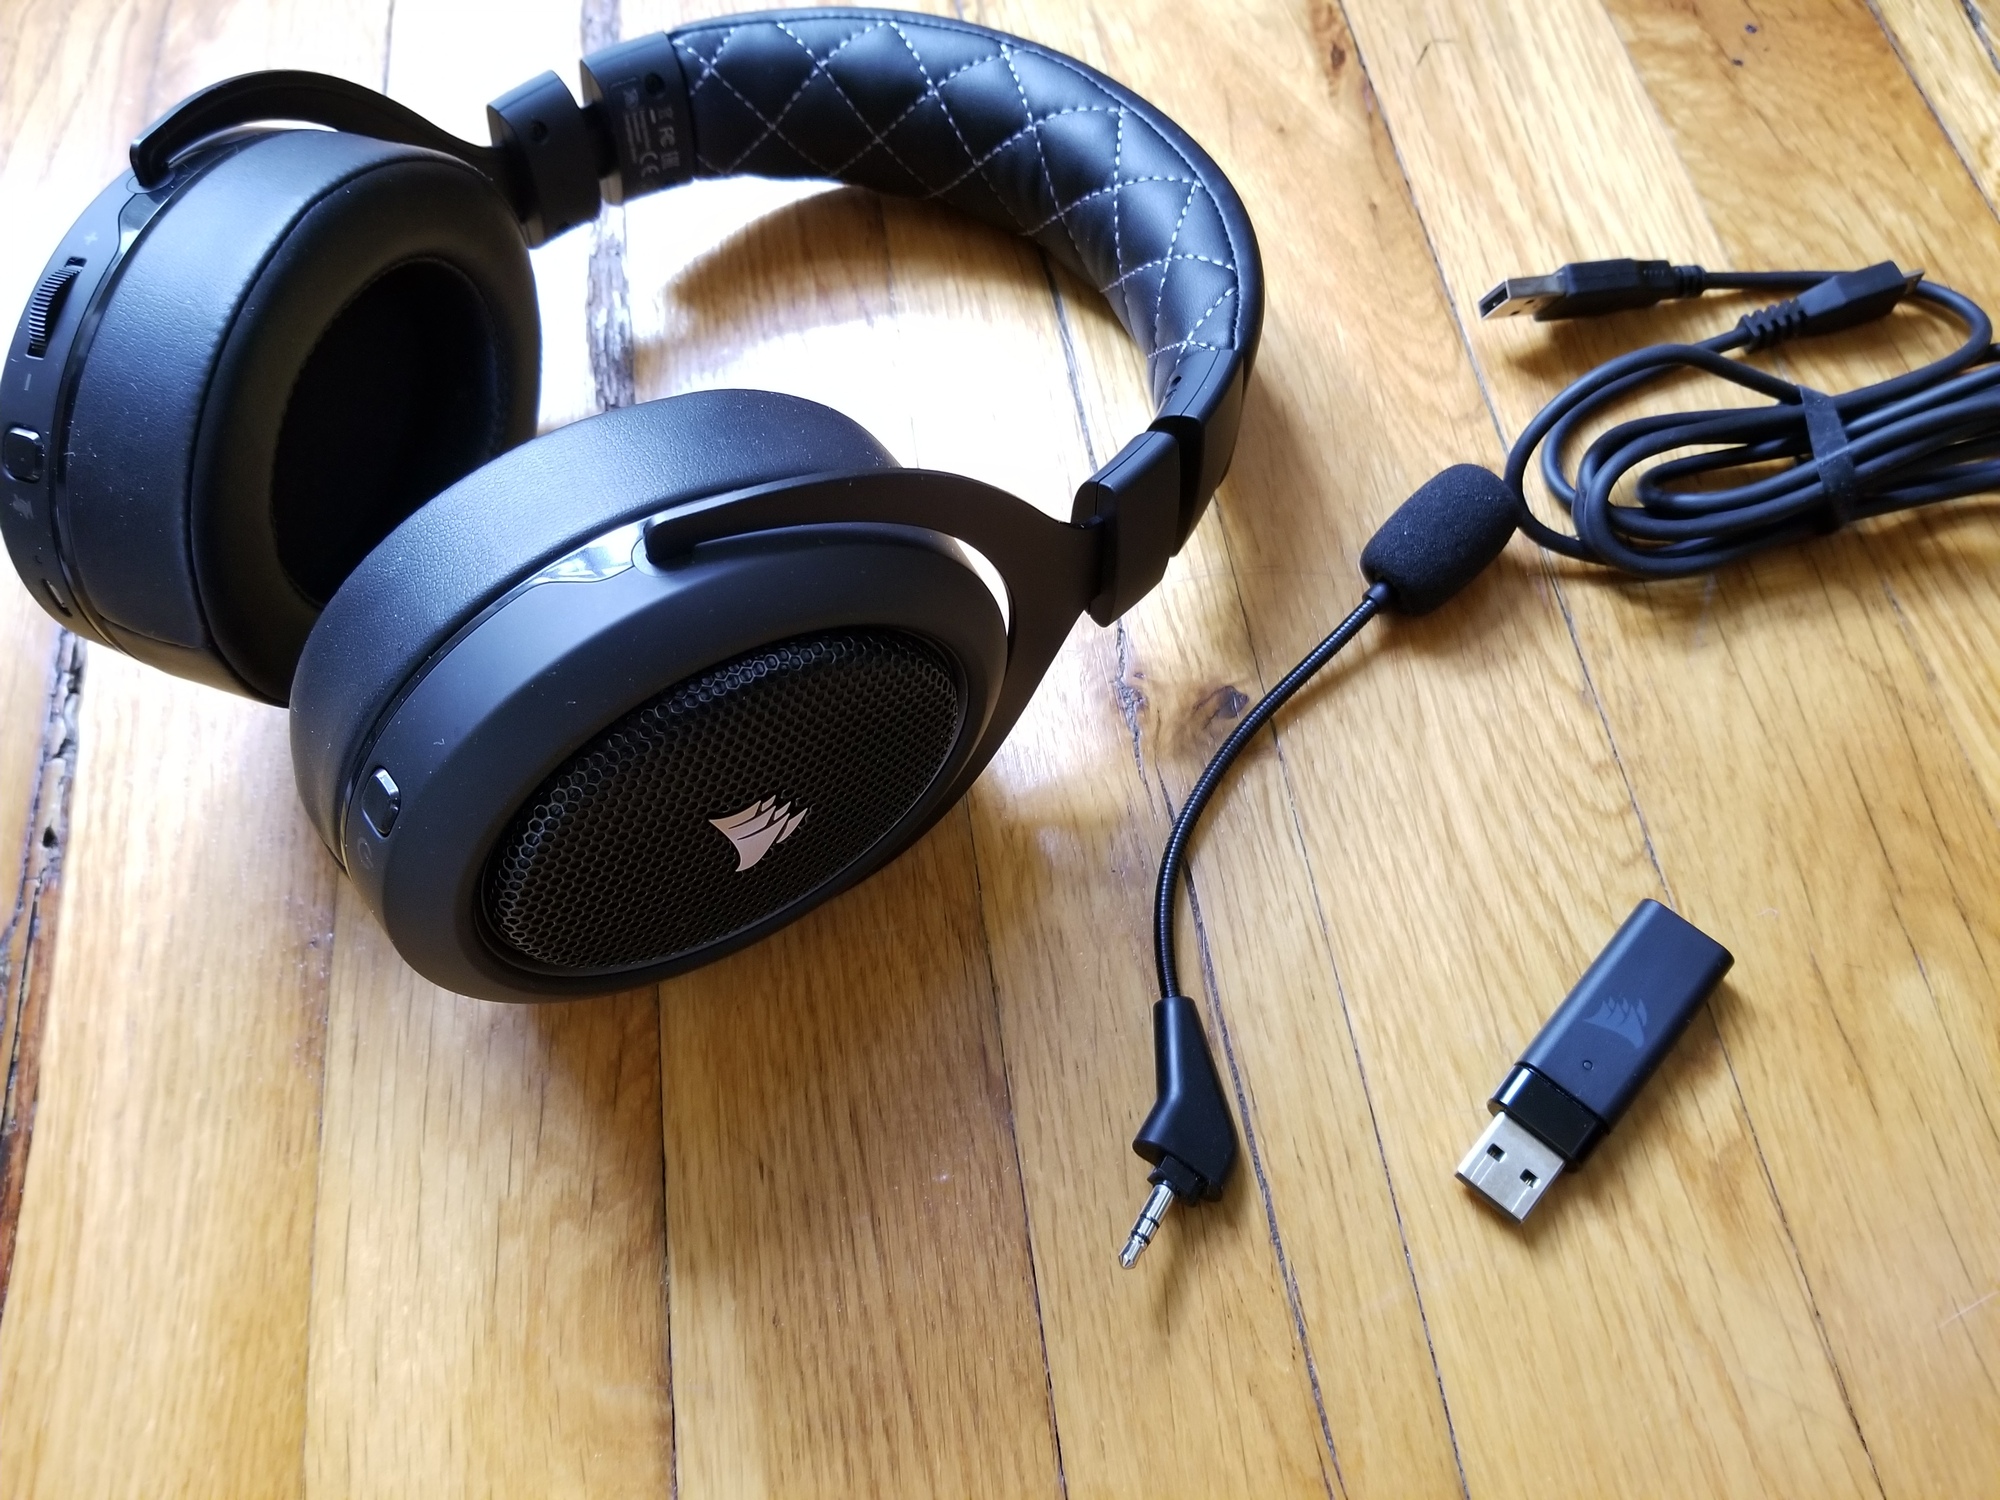 The Corsair HS70 Pro headset, with microphone, wireless adapter, and charging cable.